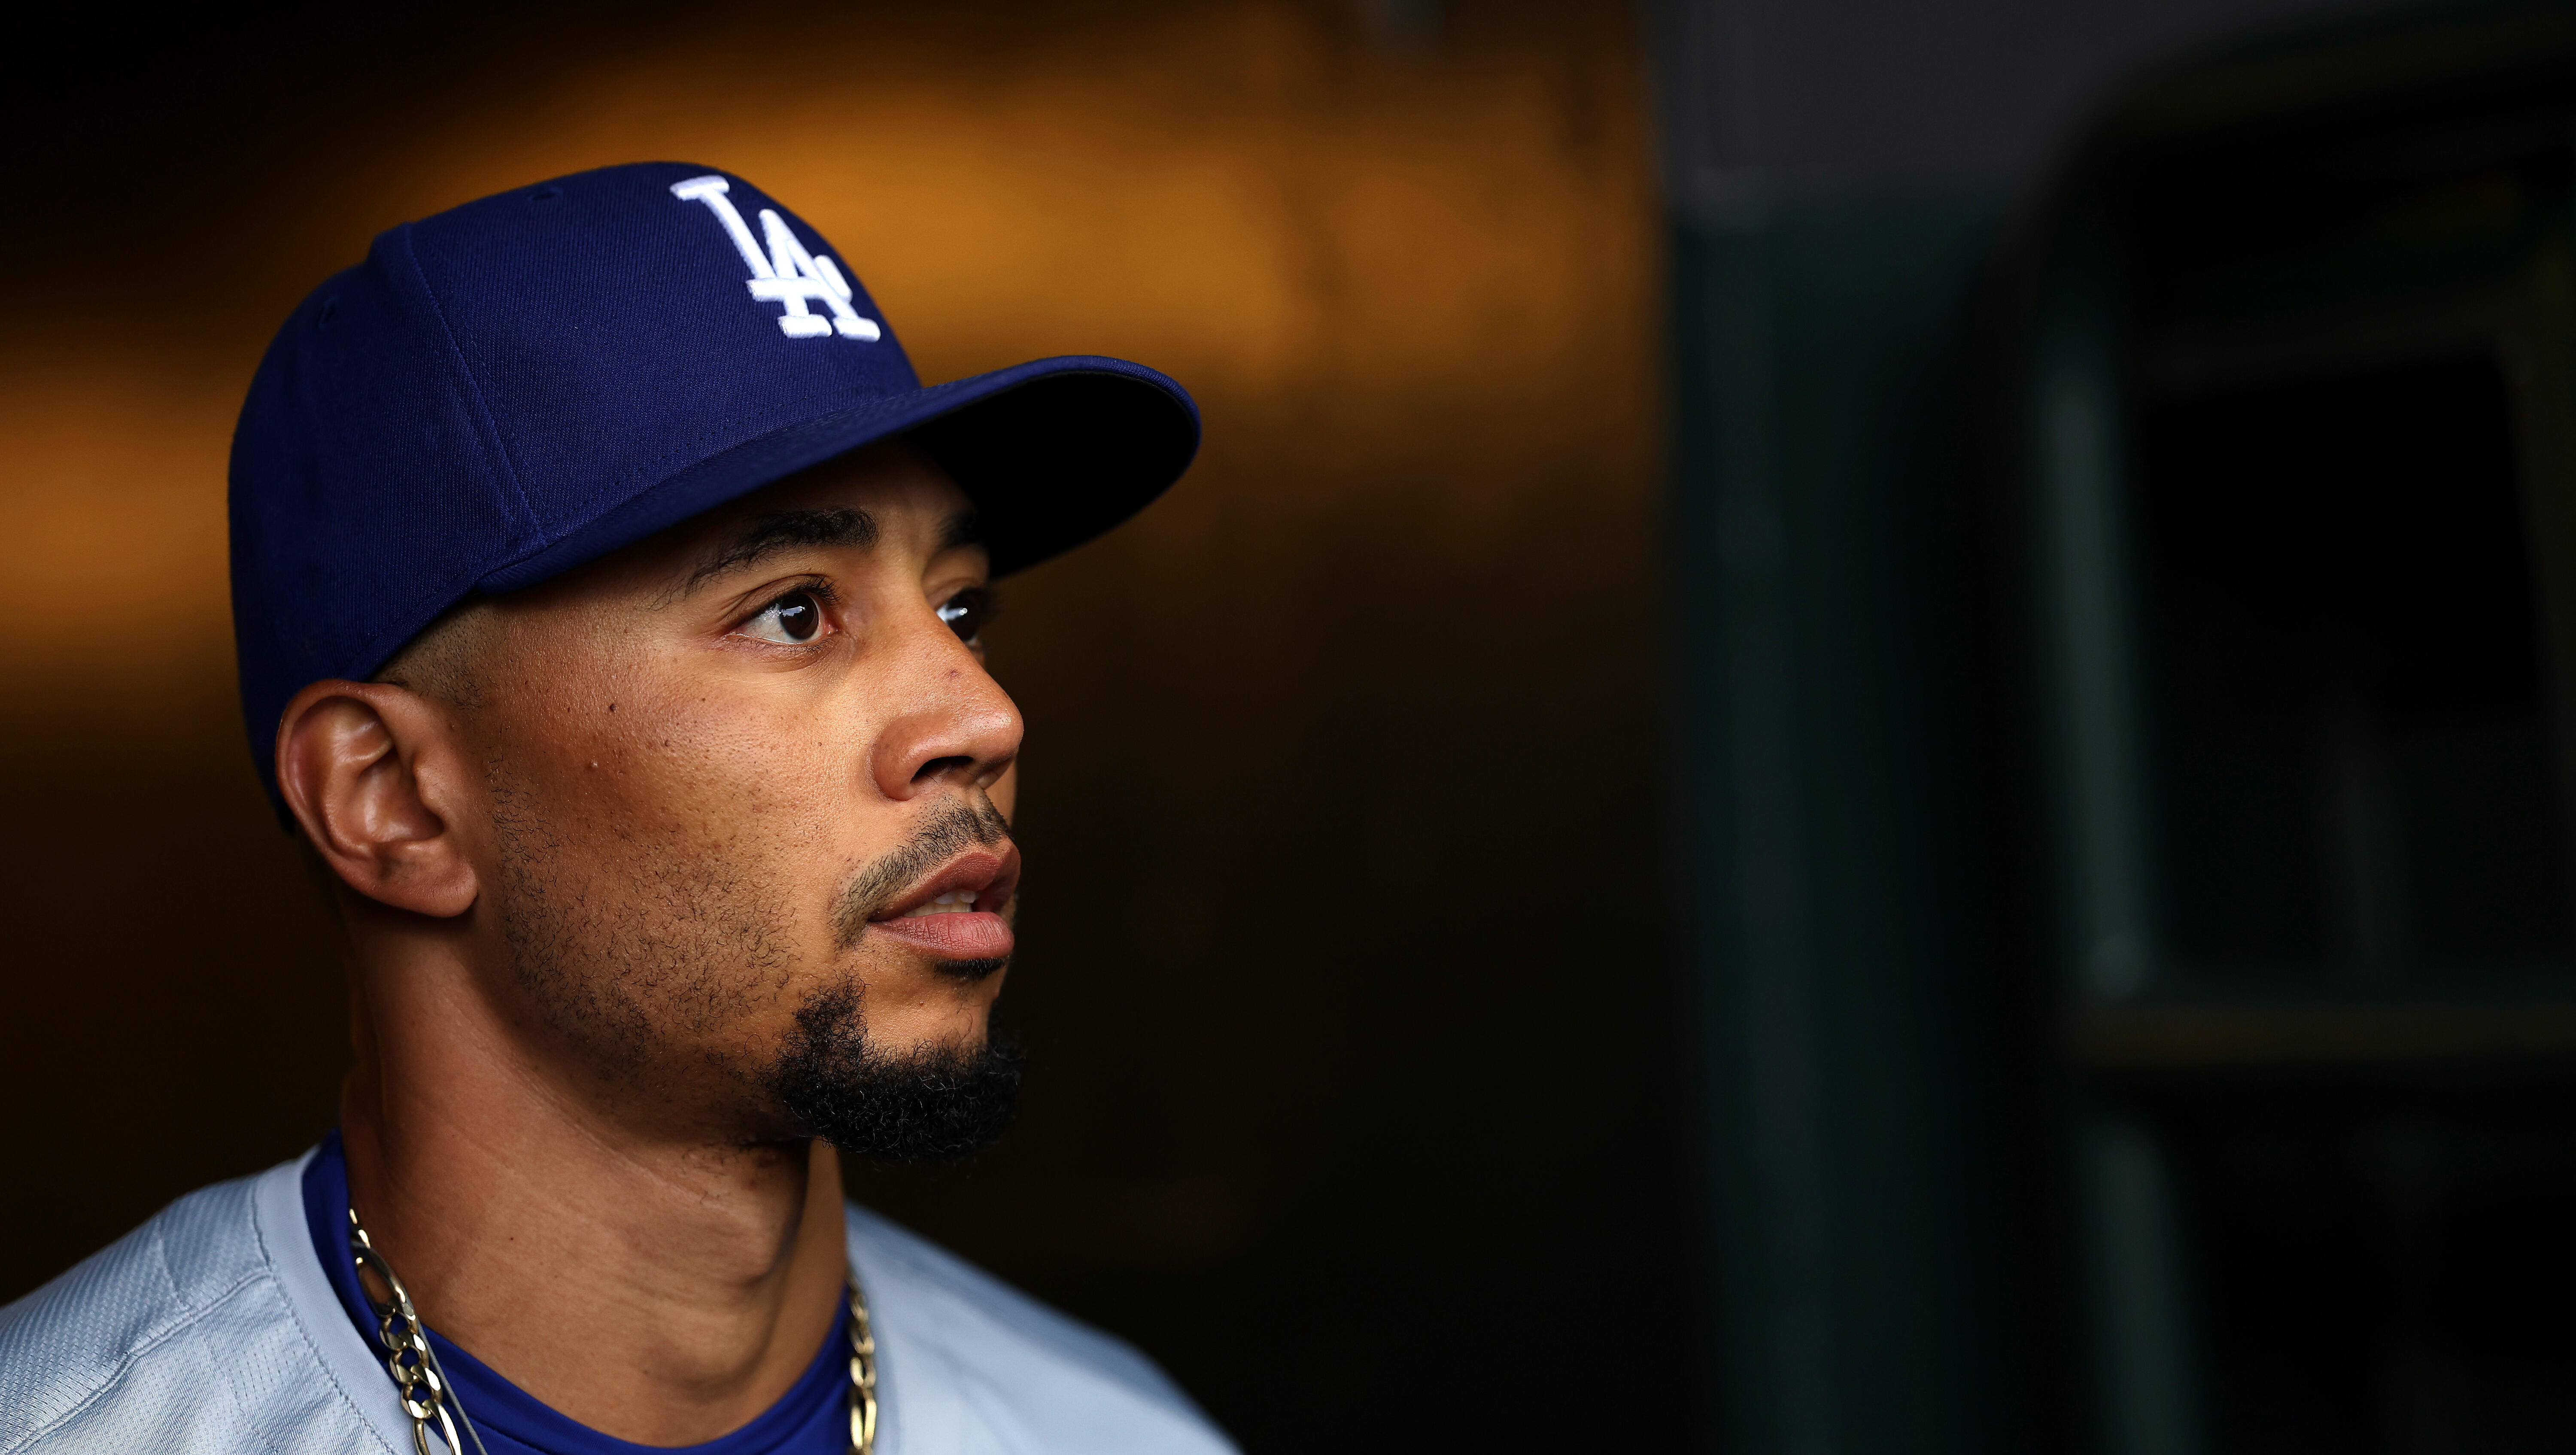 Ellen K Quote Of The Day: Dodger Wisdom From Mookie Betts